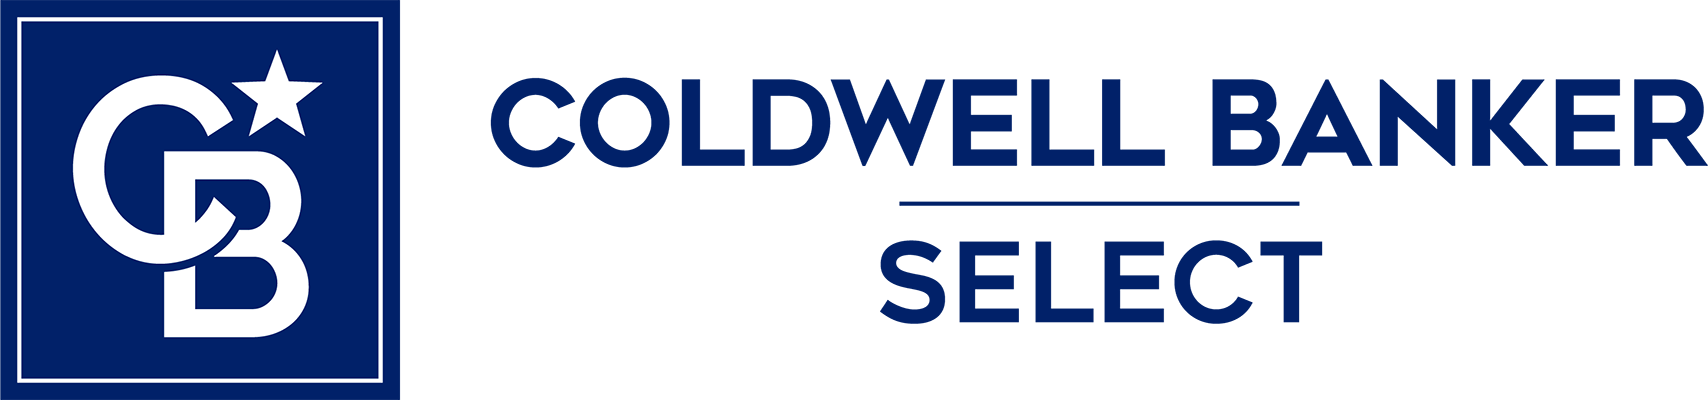 Claremore Office - Coldwell Banker Select Logo